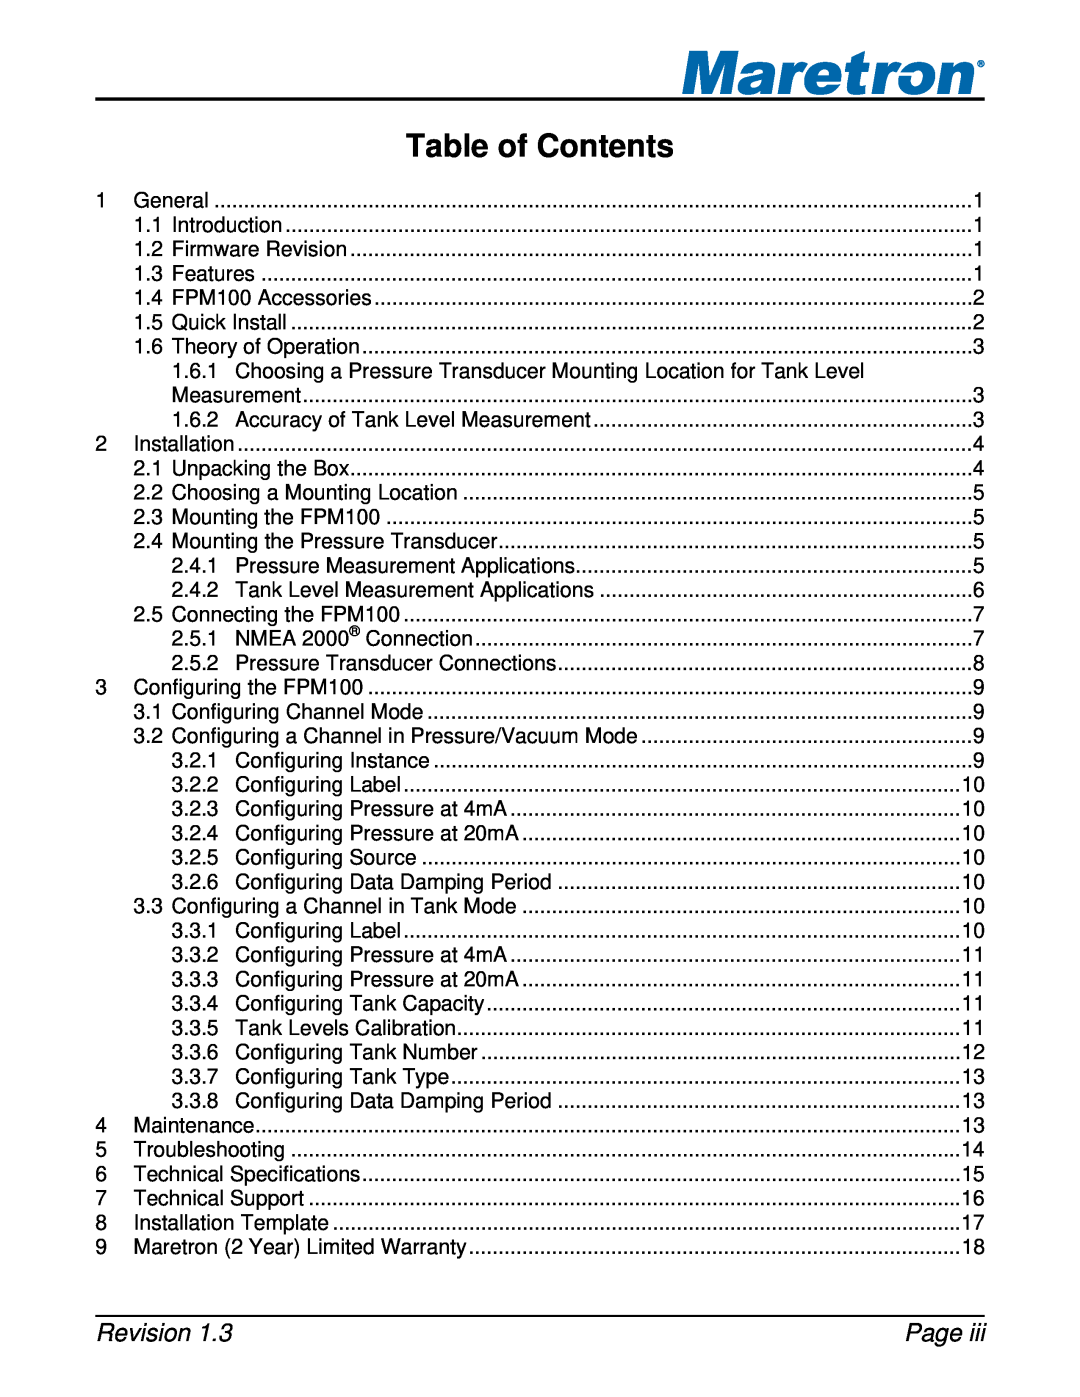 Maretron FPM100 user manual Table of Contents, Revision, Page 